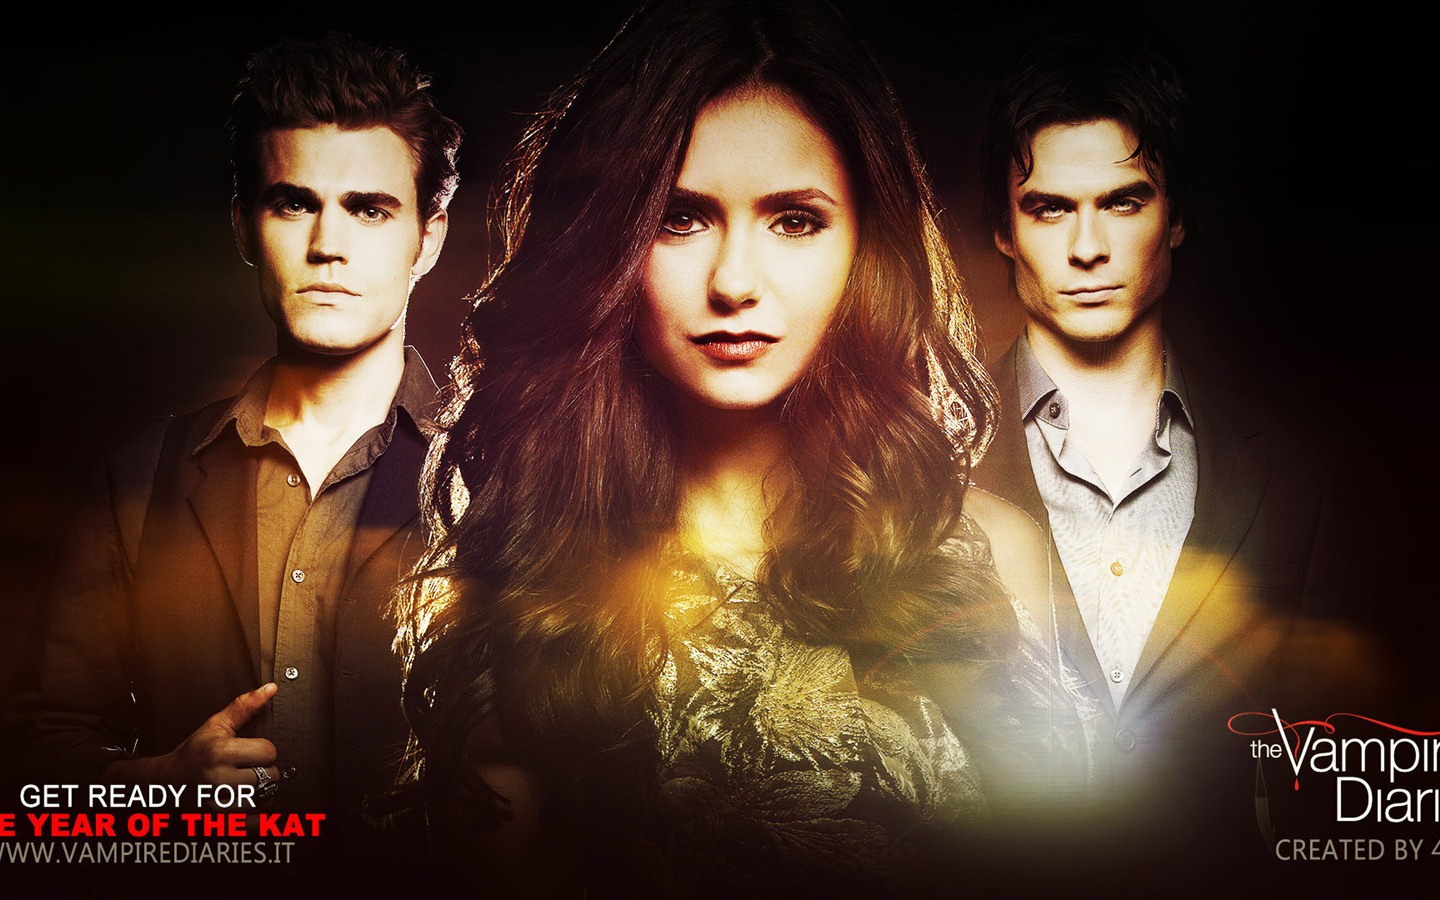 The Vampire Diaries HD Wallpapers #17 - 1440x900